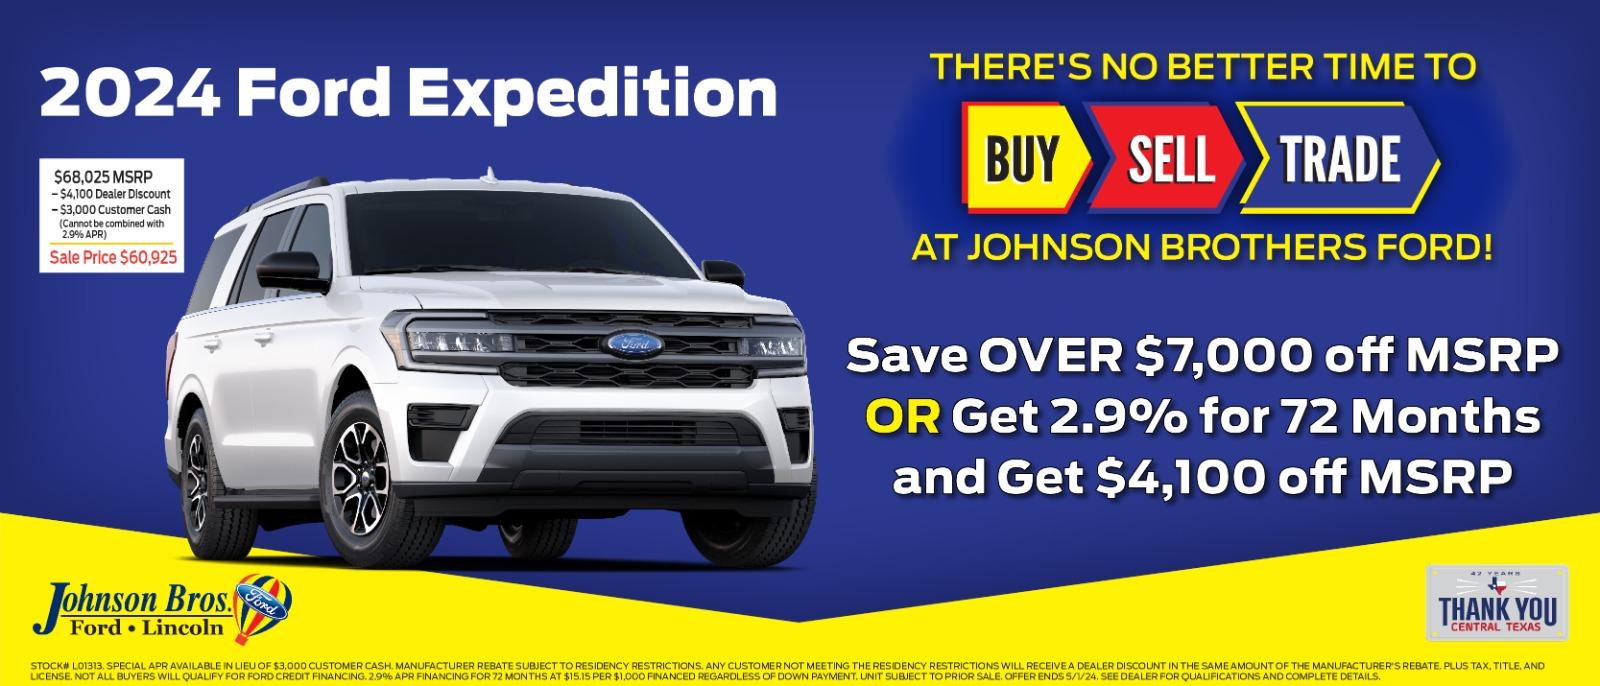 2024 Ford Expedition

Save over $7,000 off MSRP OR get 2.9% for 72 months and get $4,100 off MSRP